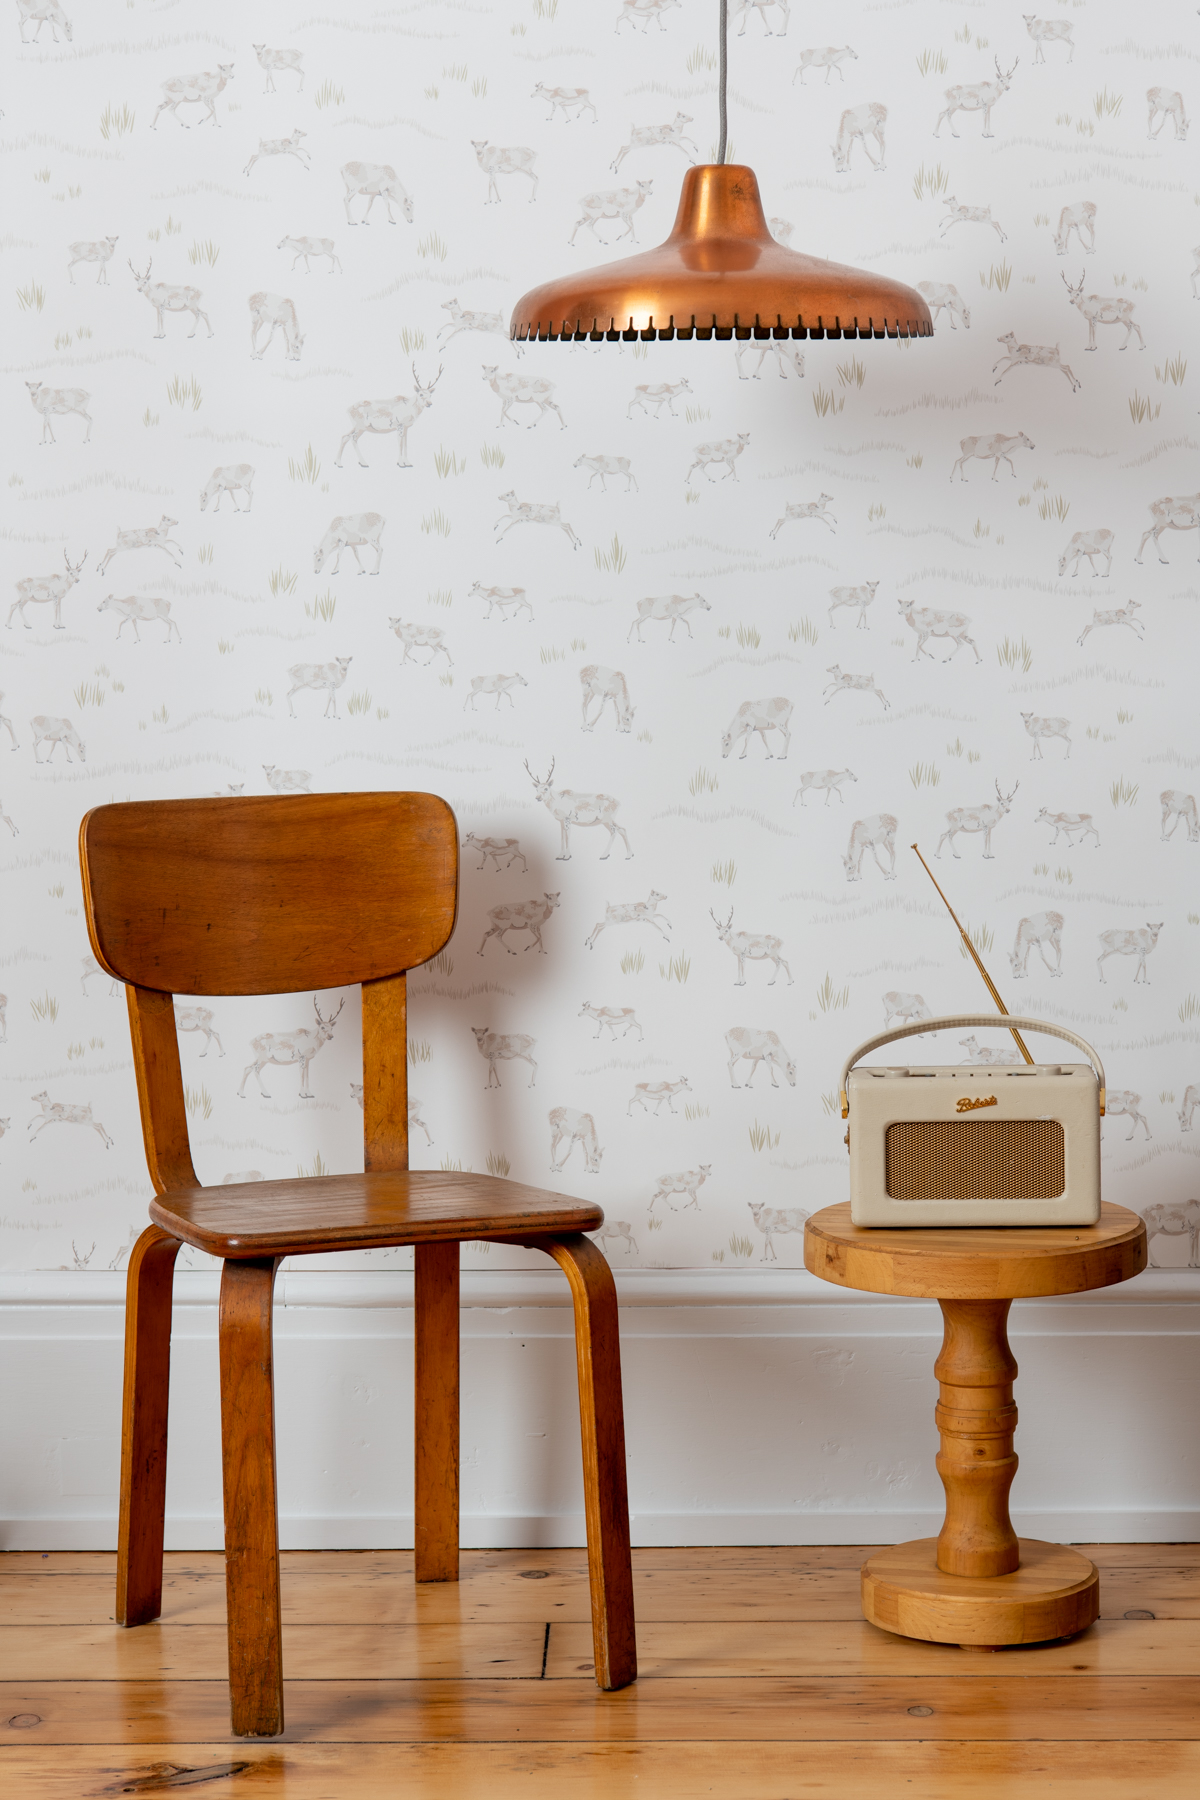 Kate Golding Caribou wallpaper // Modern wallcoverings and interior decor.